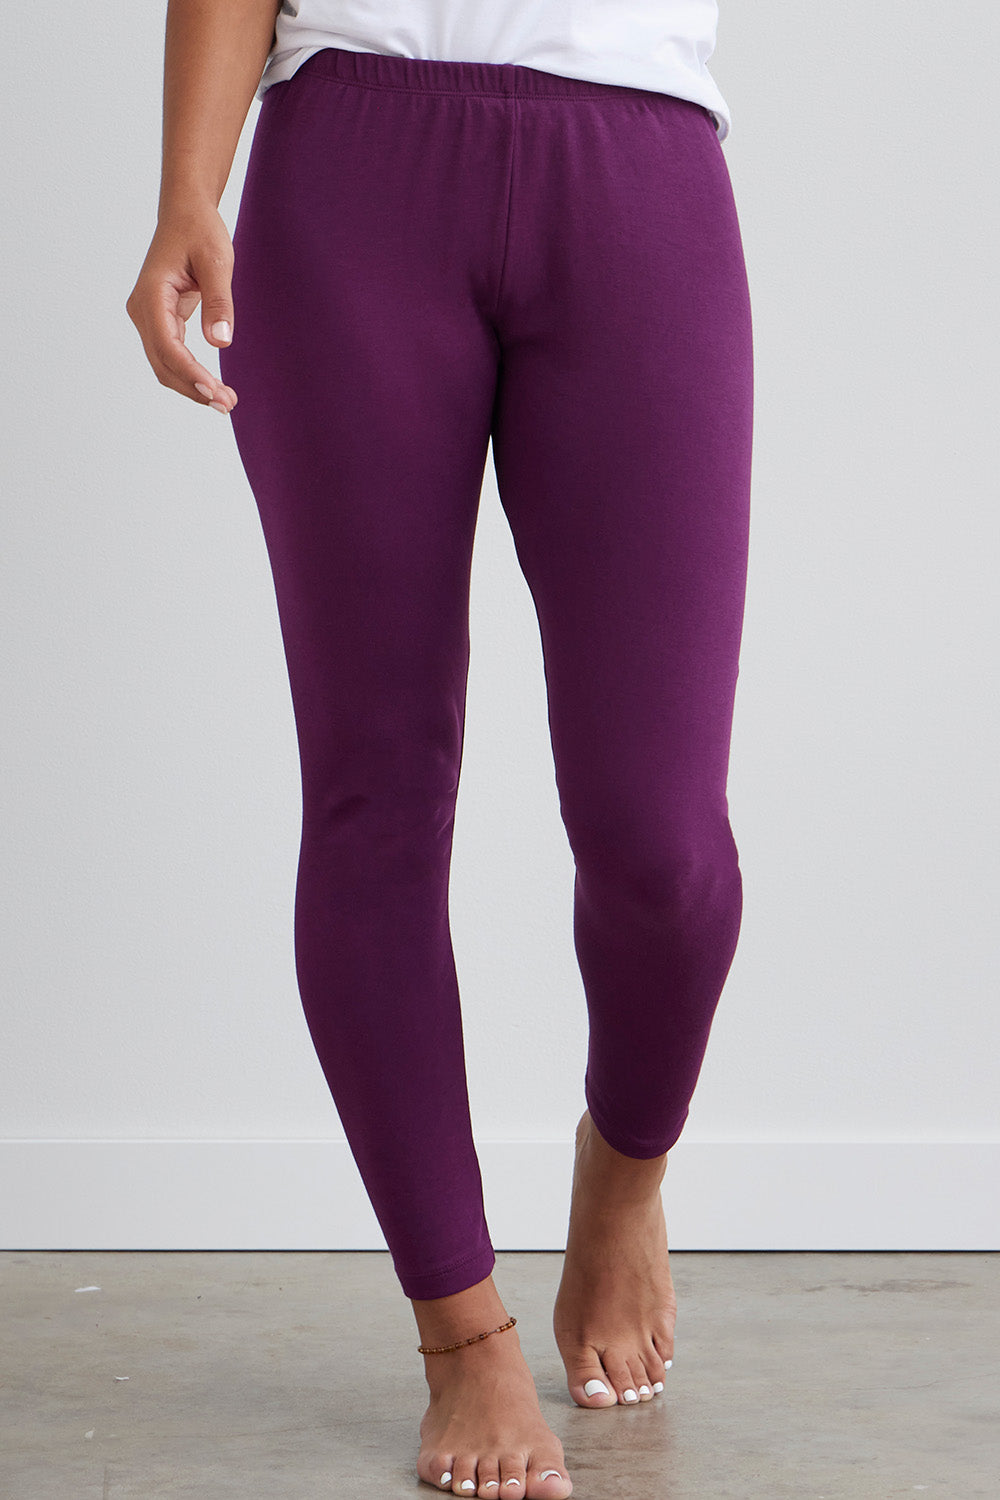 Women's Full Length Cotton Leggings With Elasticated Waist Free Size All  Colors